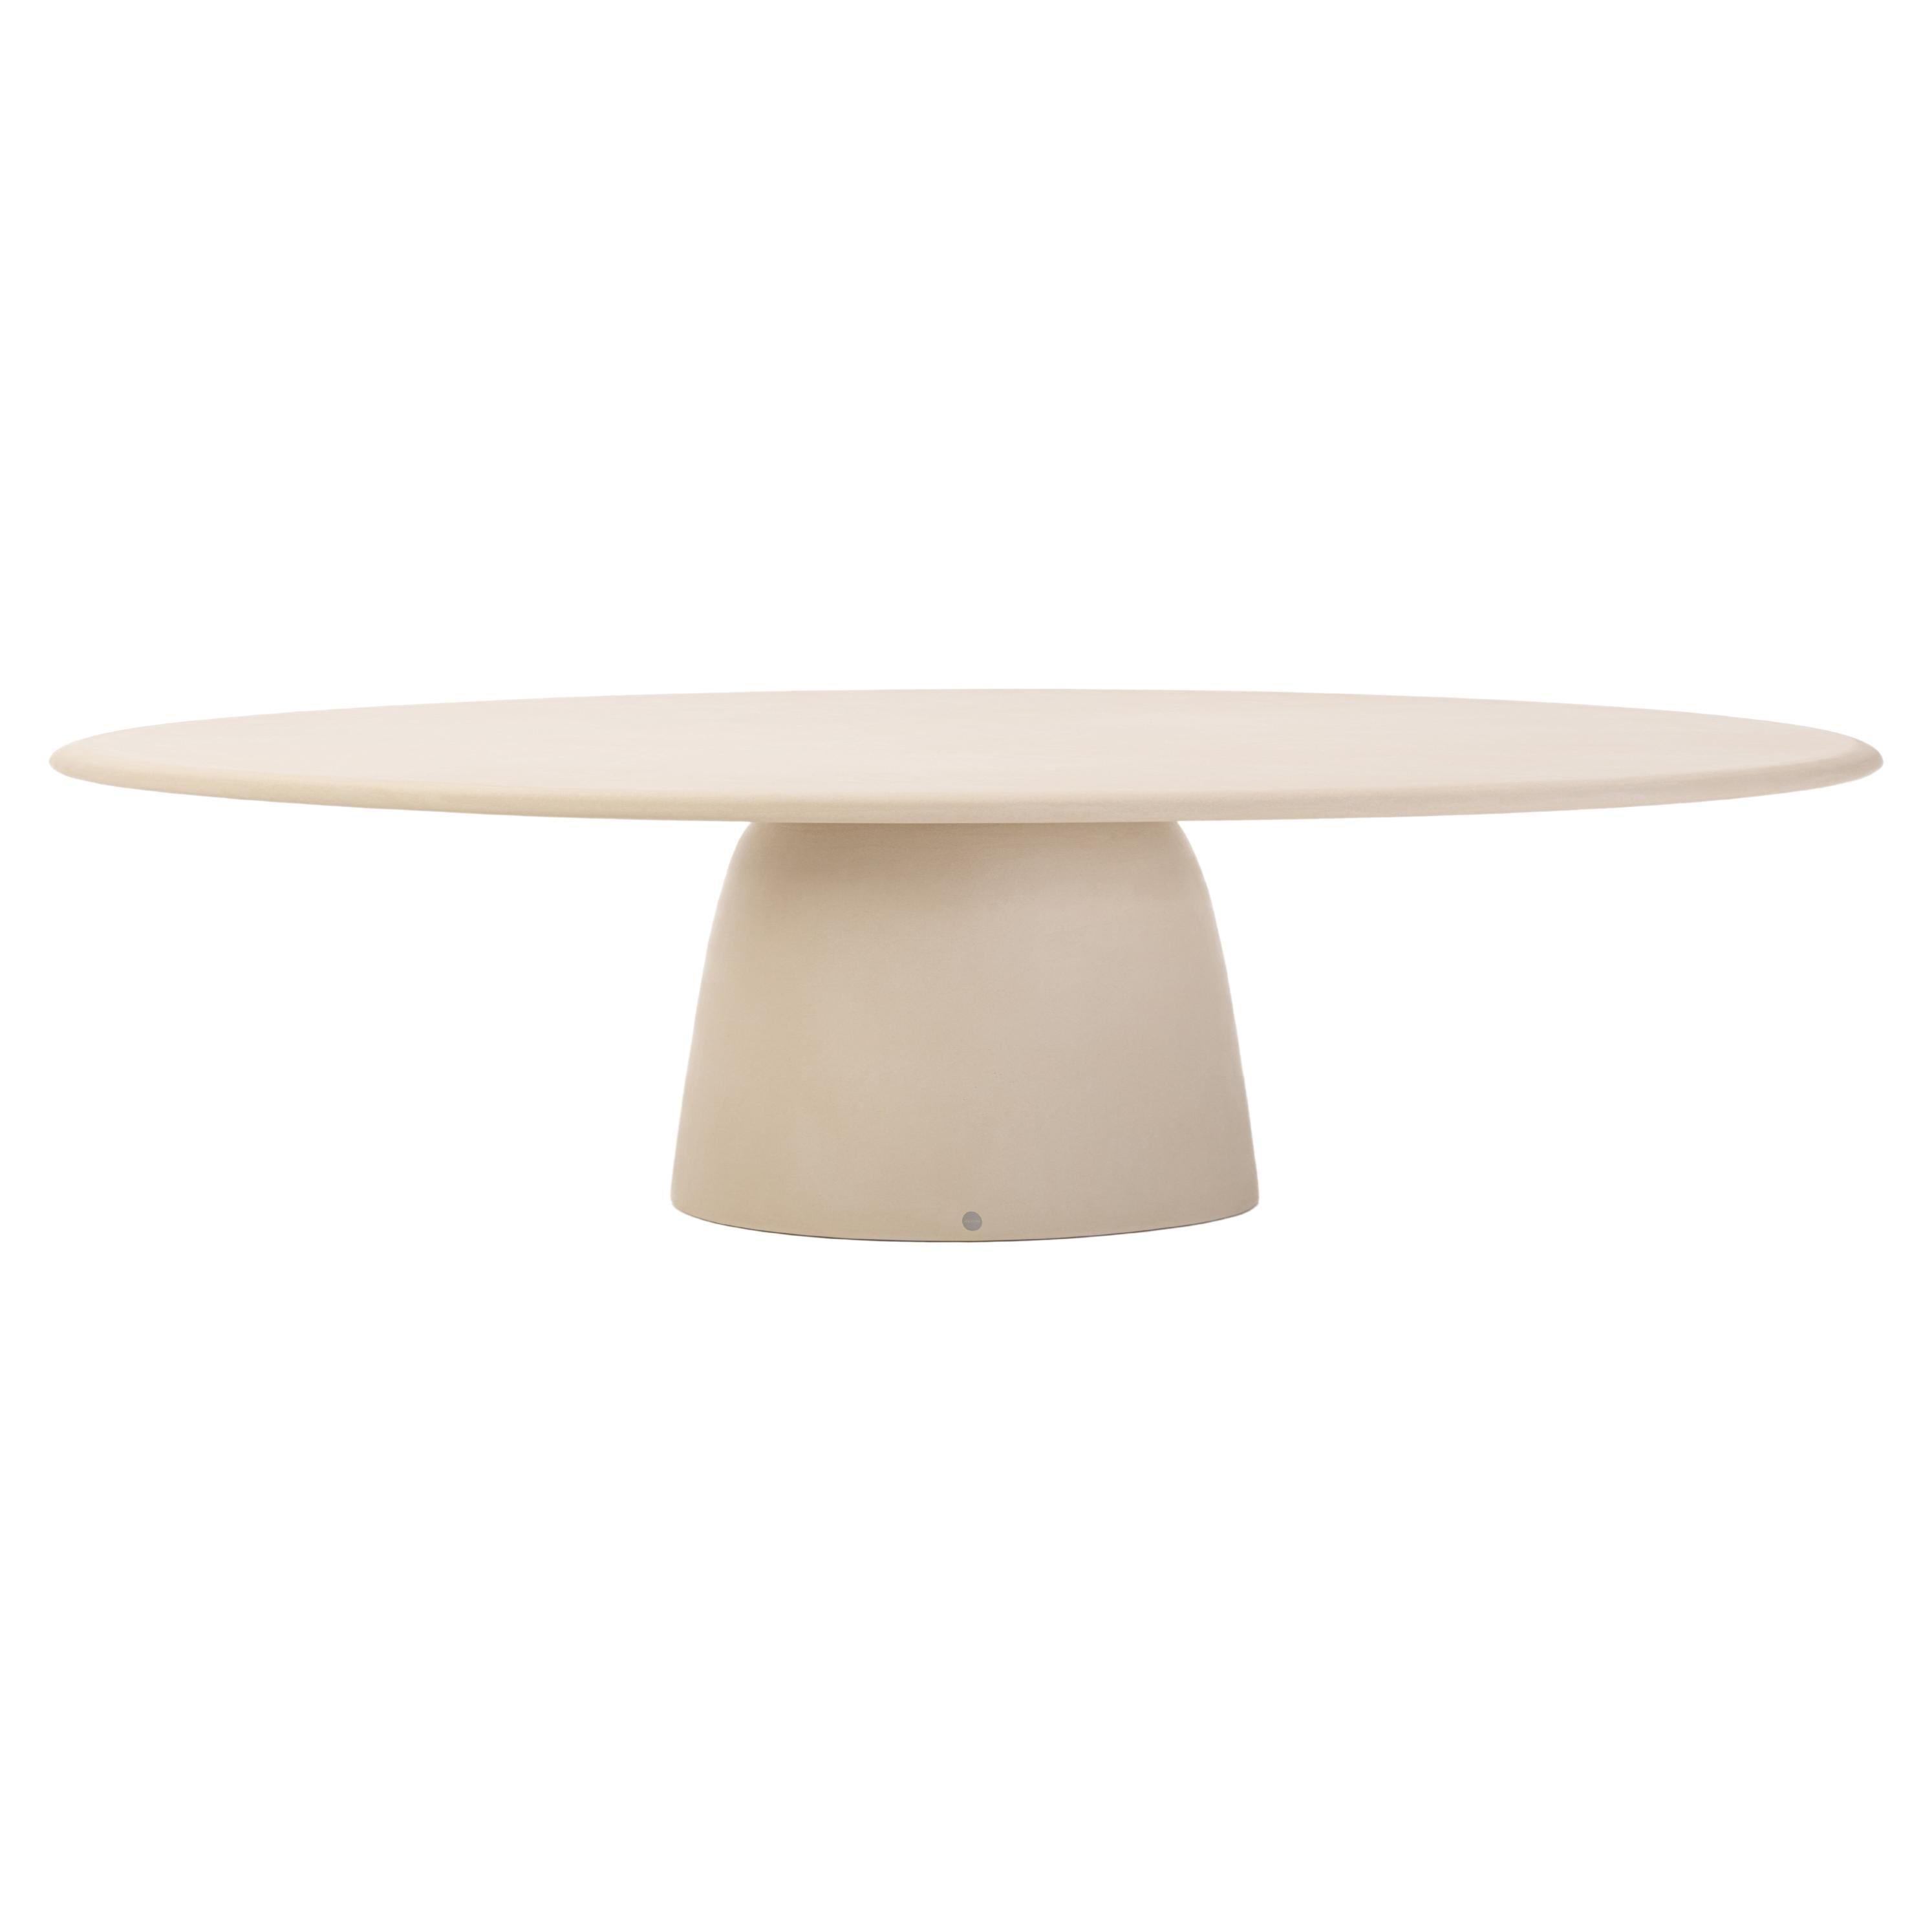 Round Natural Plaster Dining Table 300 "Menhir" by Isabelle Beaumont